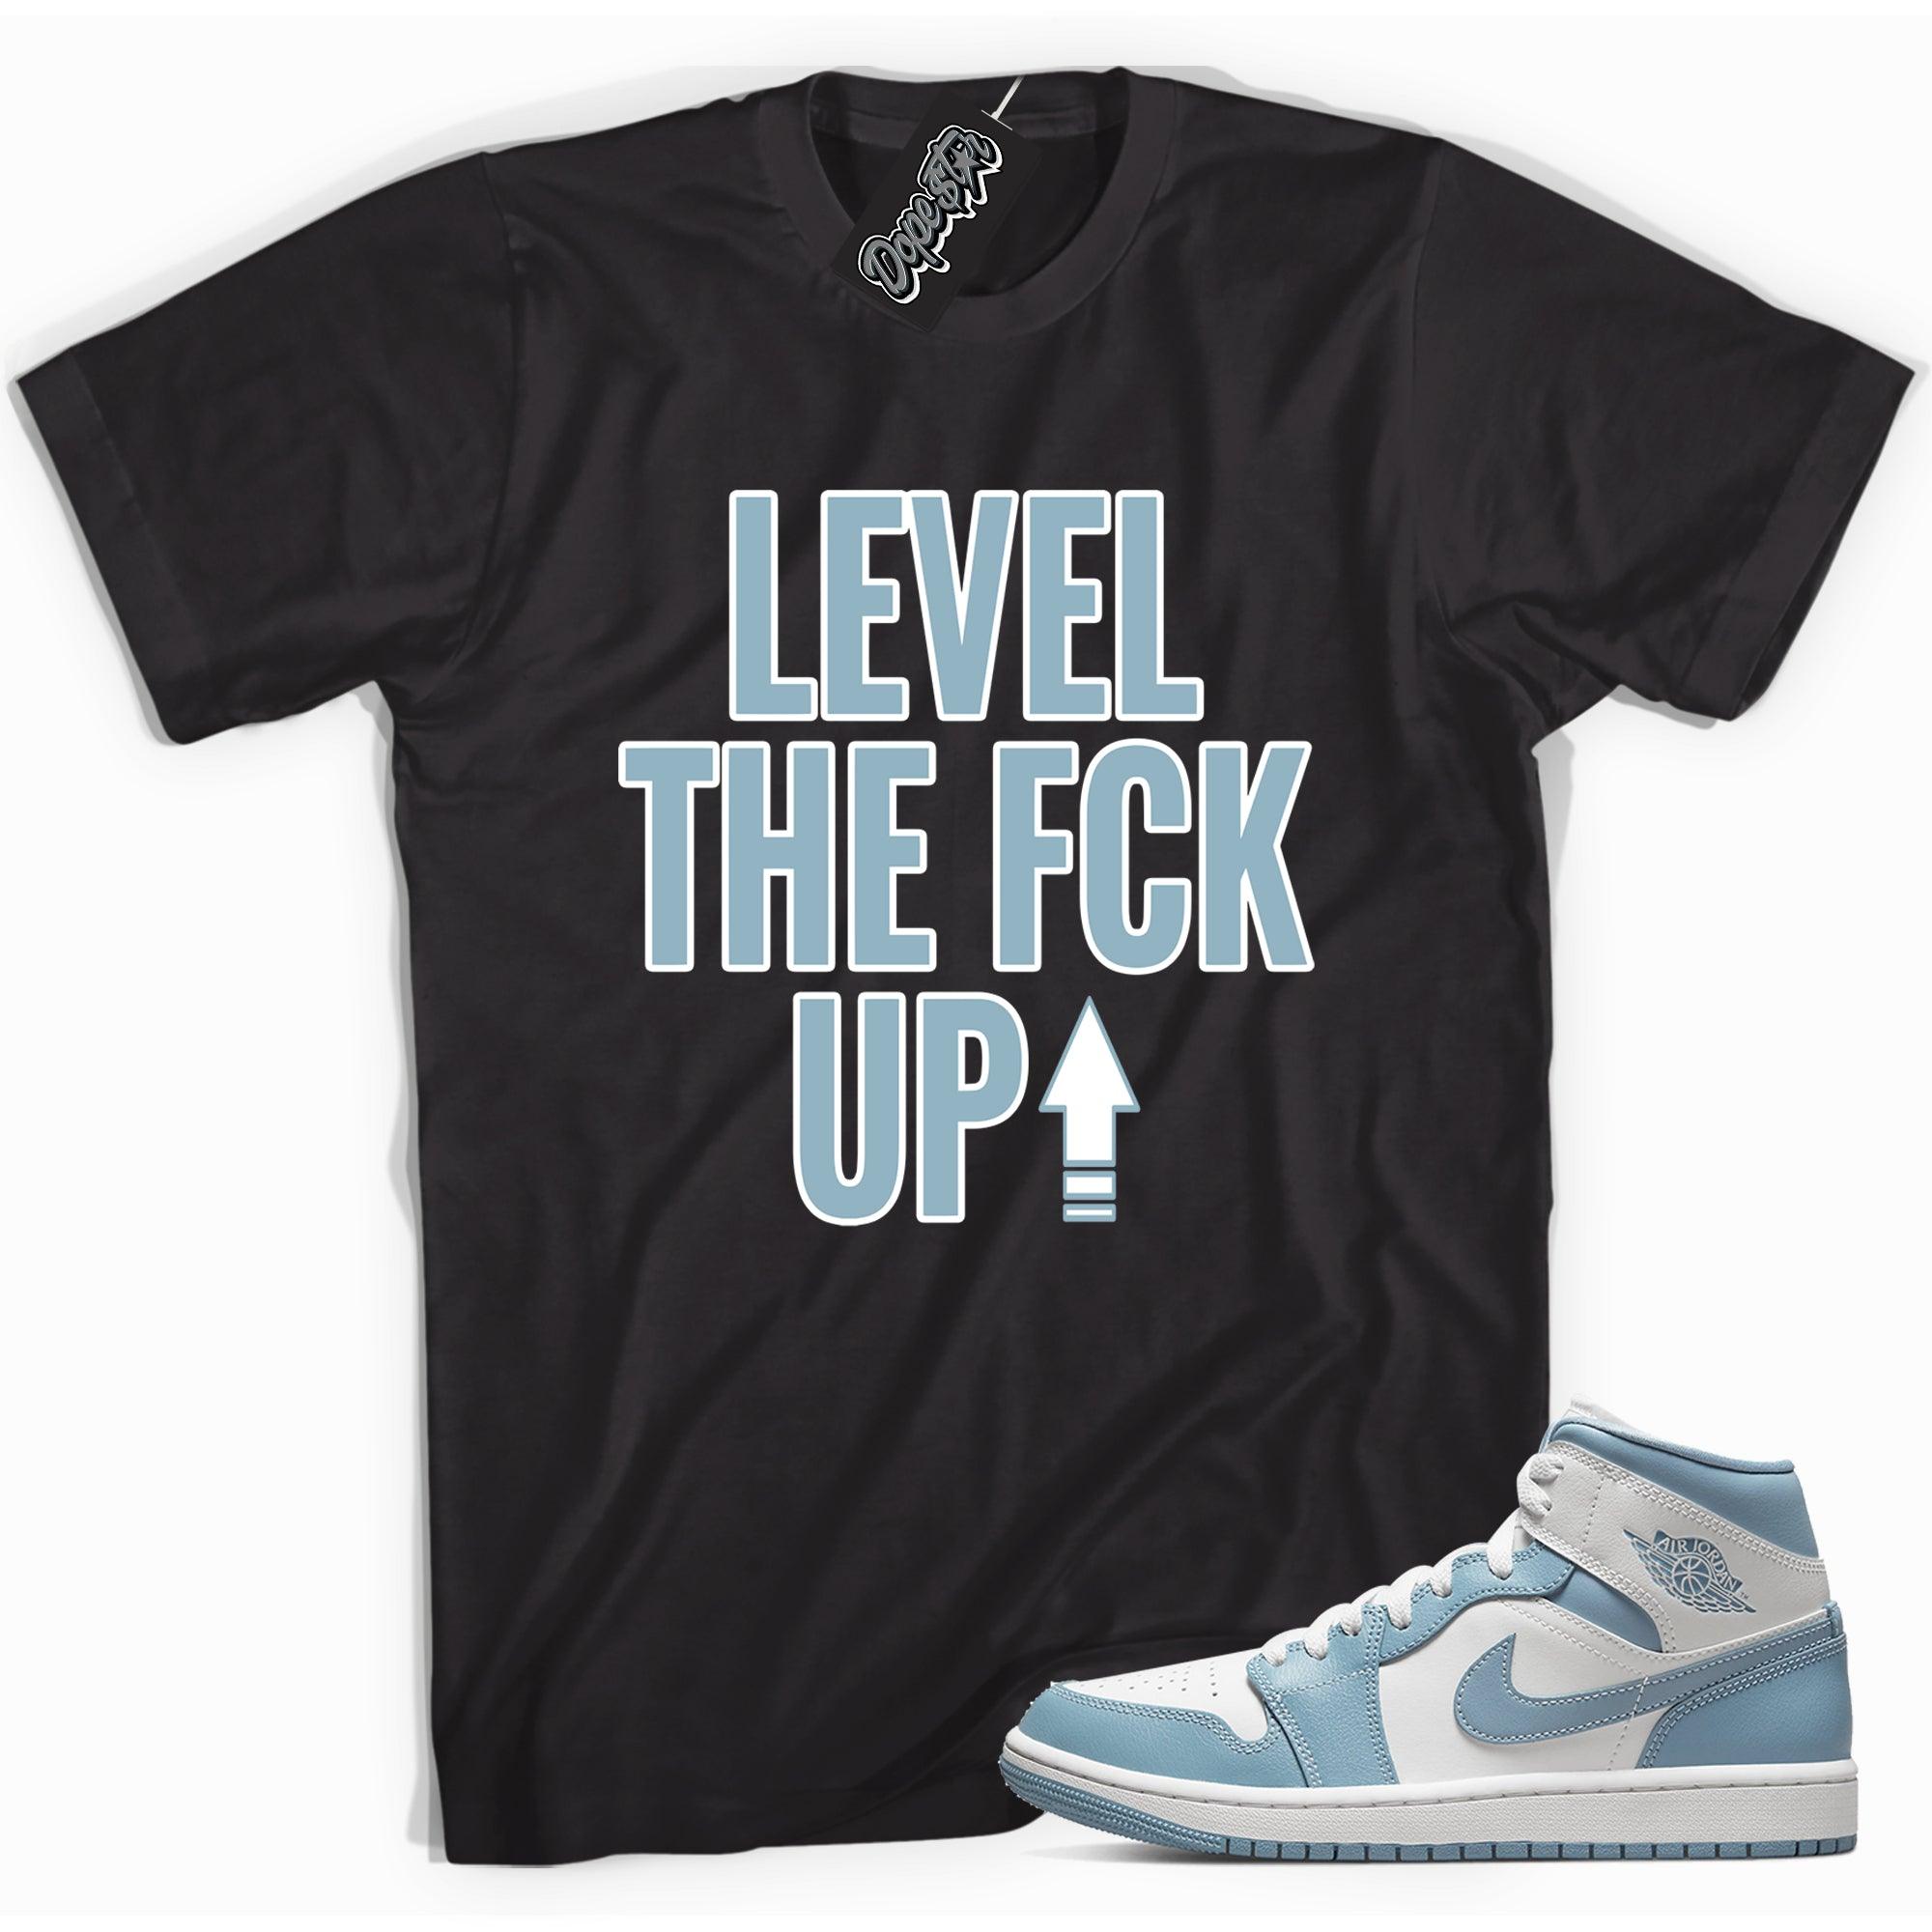 Cool black graphic tee with 'Level Up' print, that perfectly matches Air Jordan 1 Mid UNC sneakers.